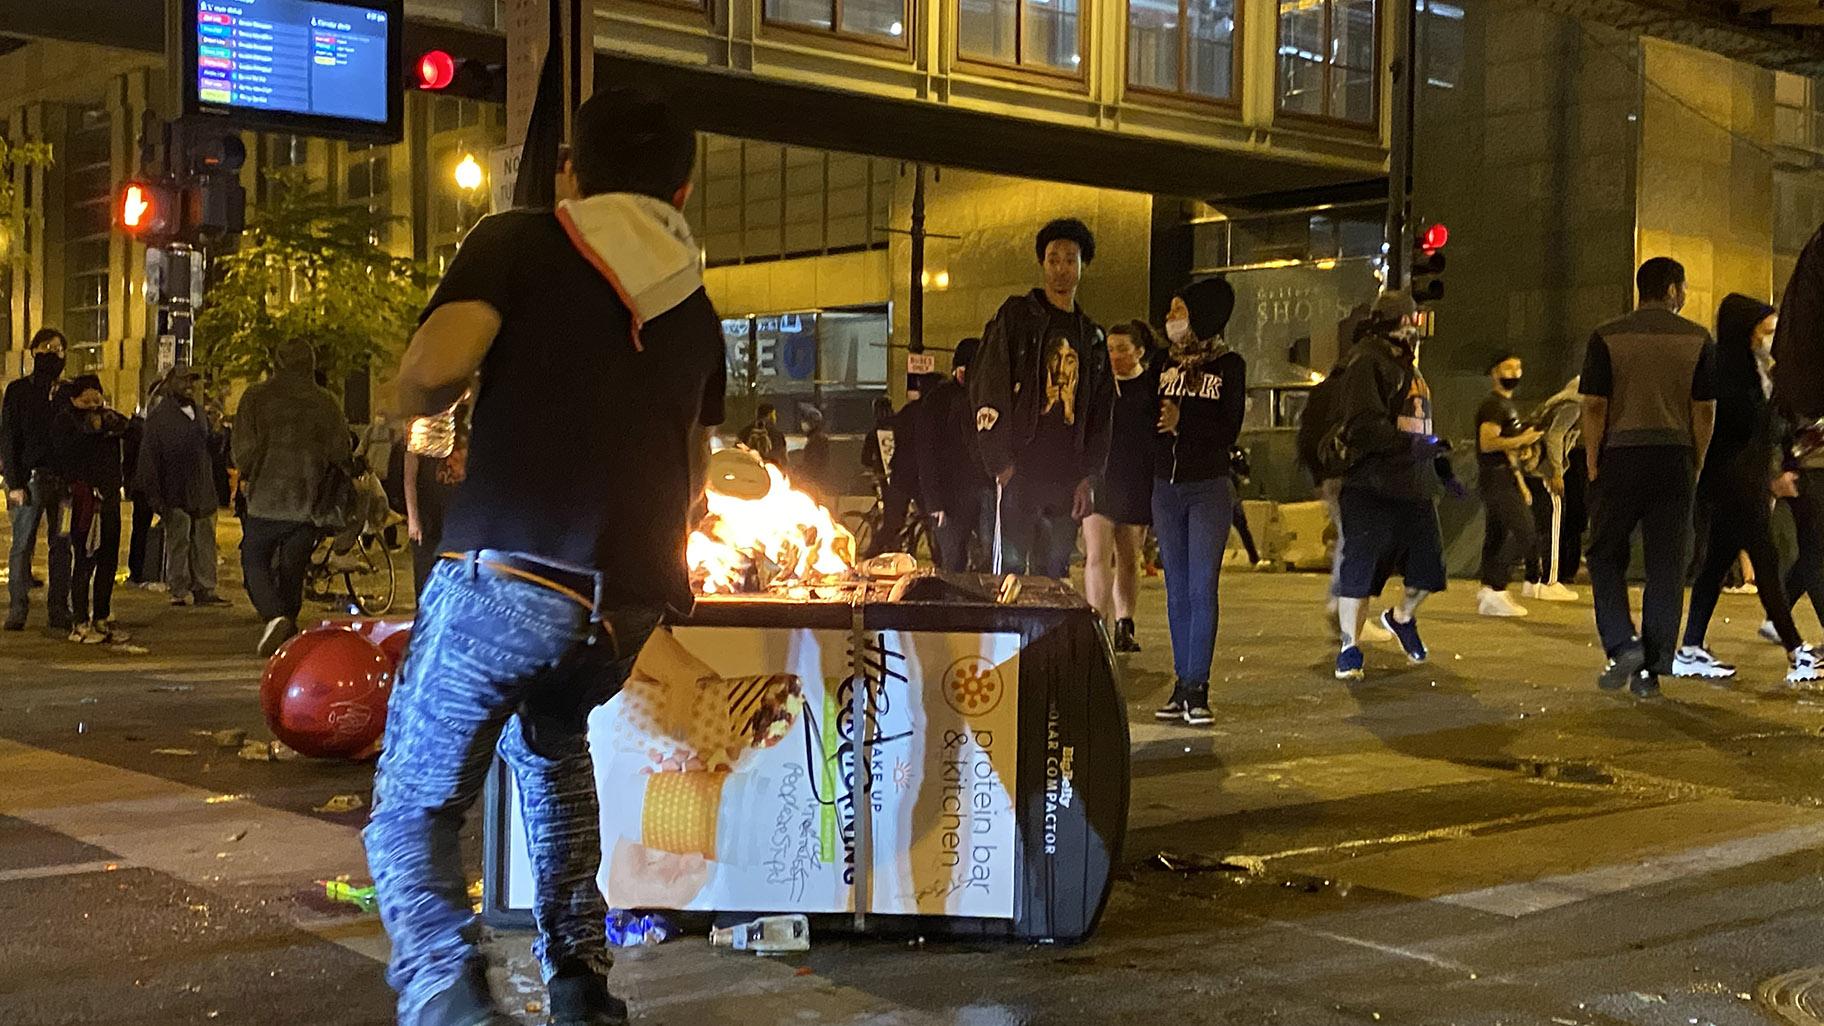 A chaotic scene in Chicago on Saturday, May 30, 2020. (Hugo Balta / WTTW News)